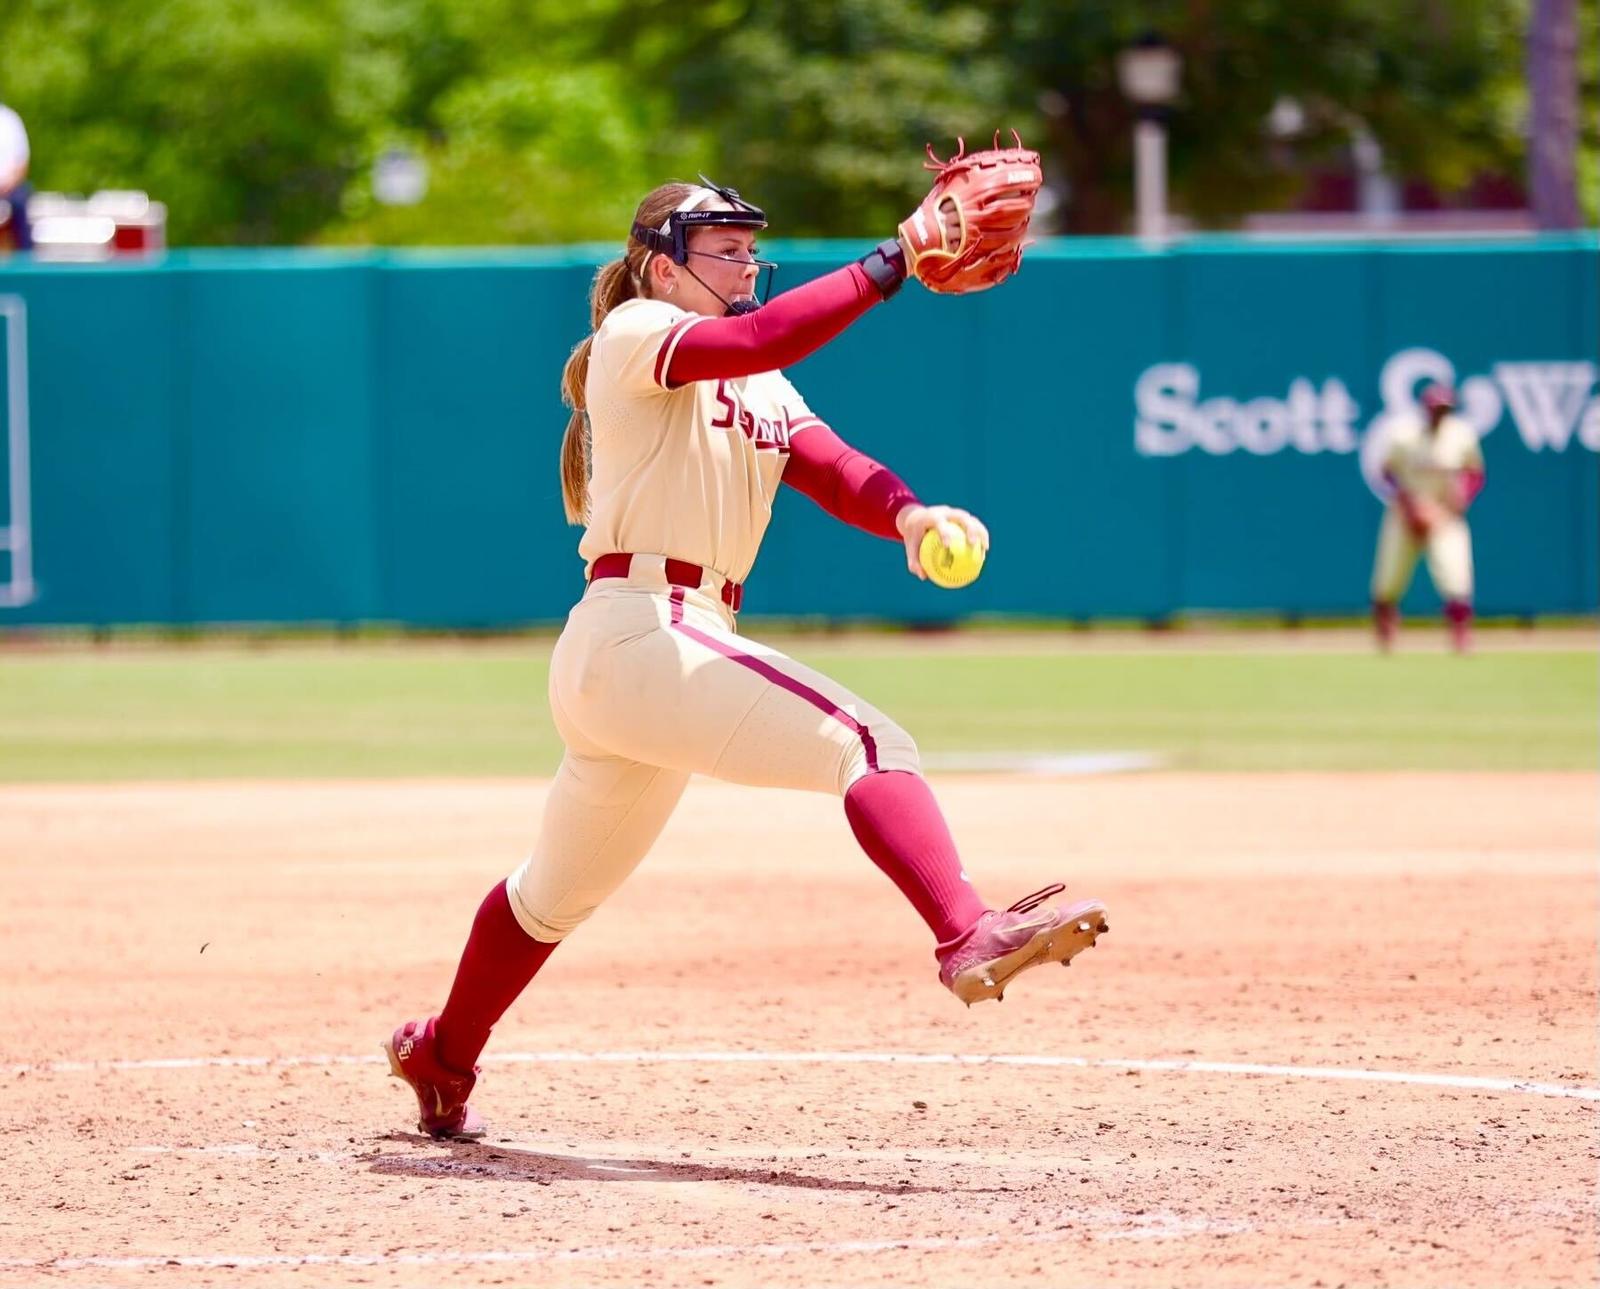 No. 16 Softball Grinds Out 2-1 Win to Complete Series Sweep - Florida State University - Florida State University